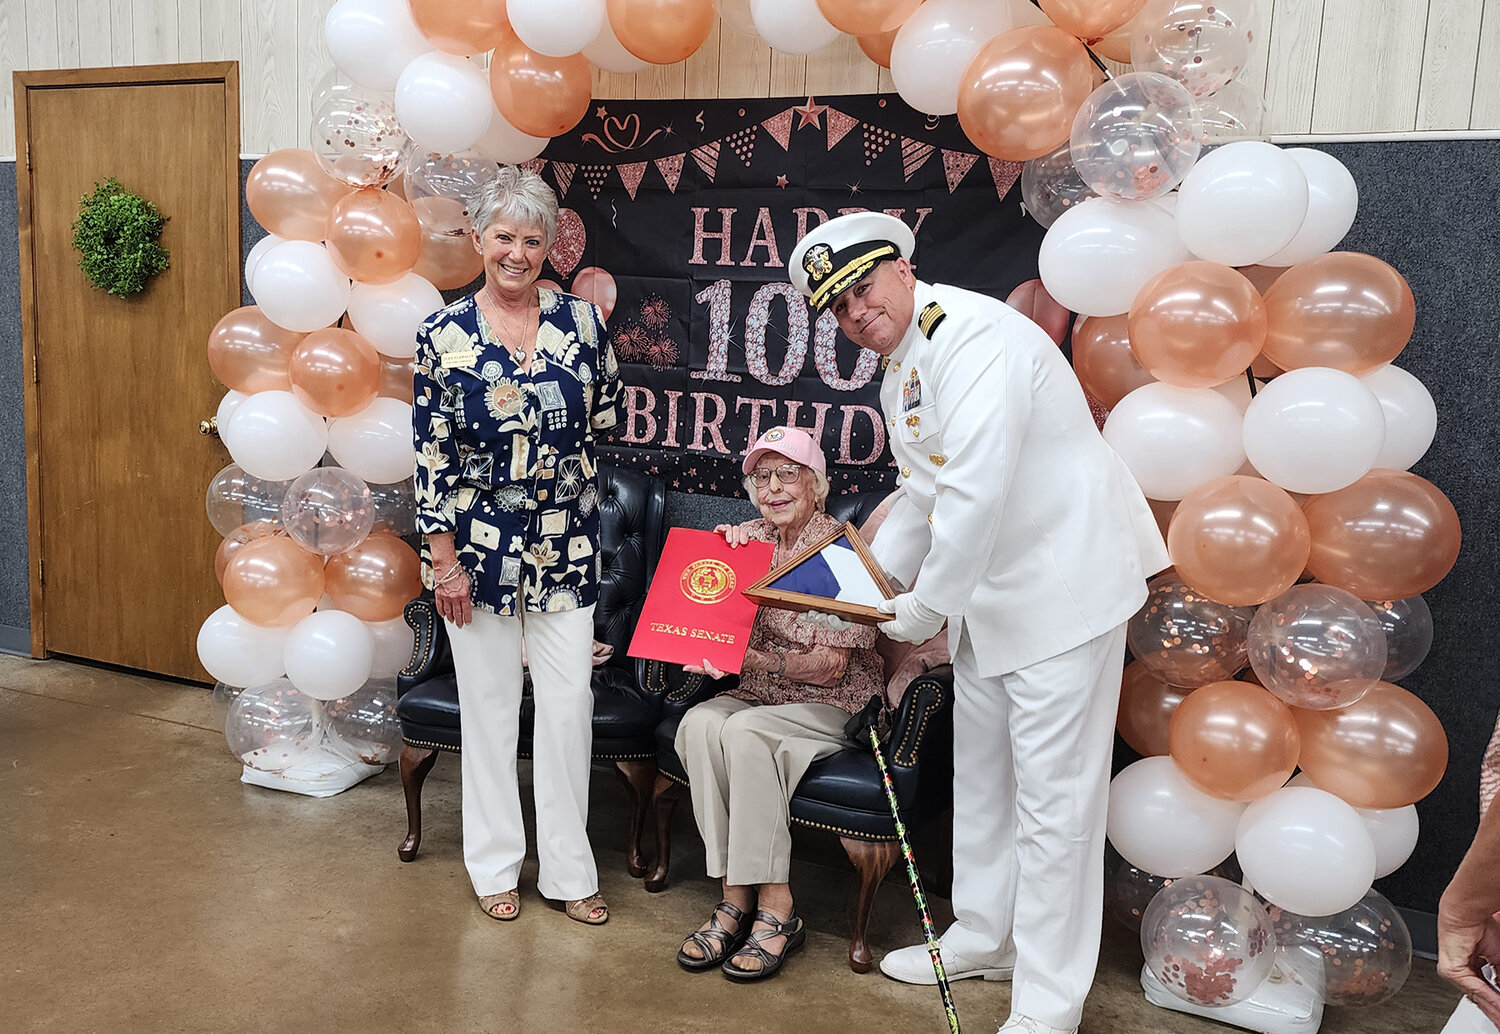 Judy Flanagin, with the assistance of Captain John Stuart US Navy, presents a flag on behalf of Senator Phil King's office to Jean Buford to honor her 100th birthday.